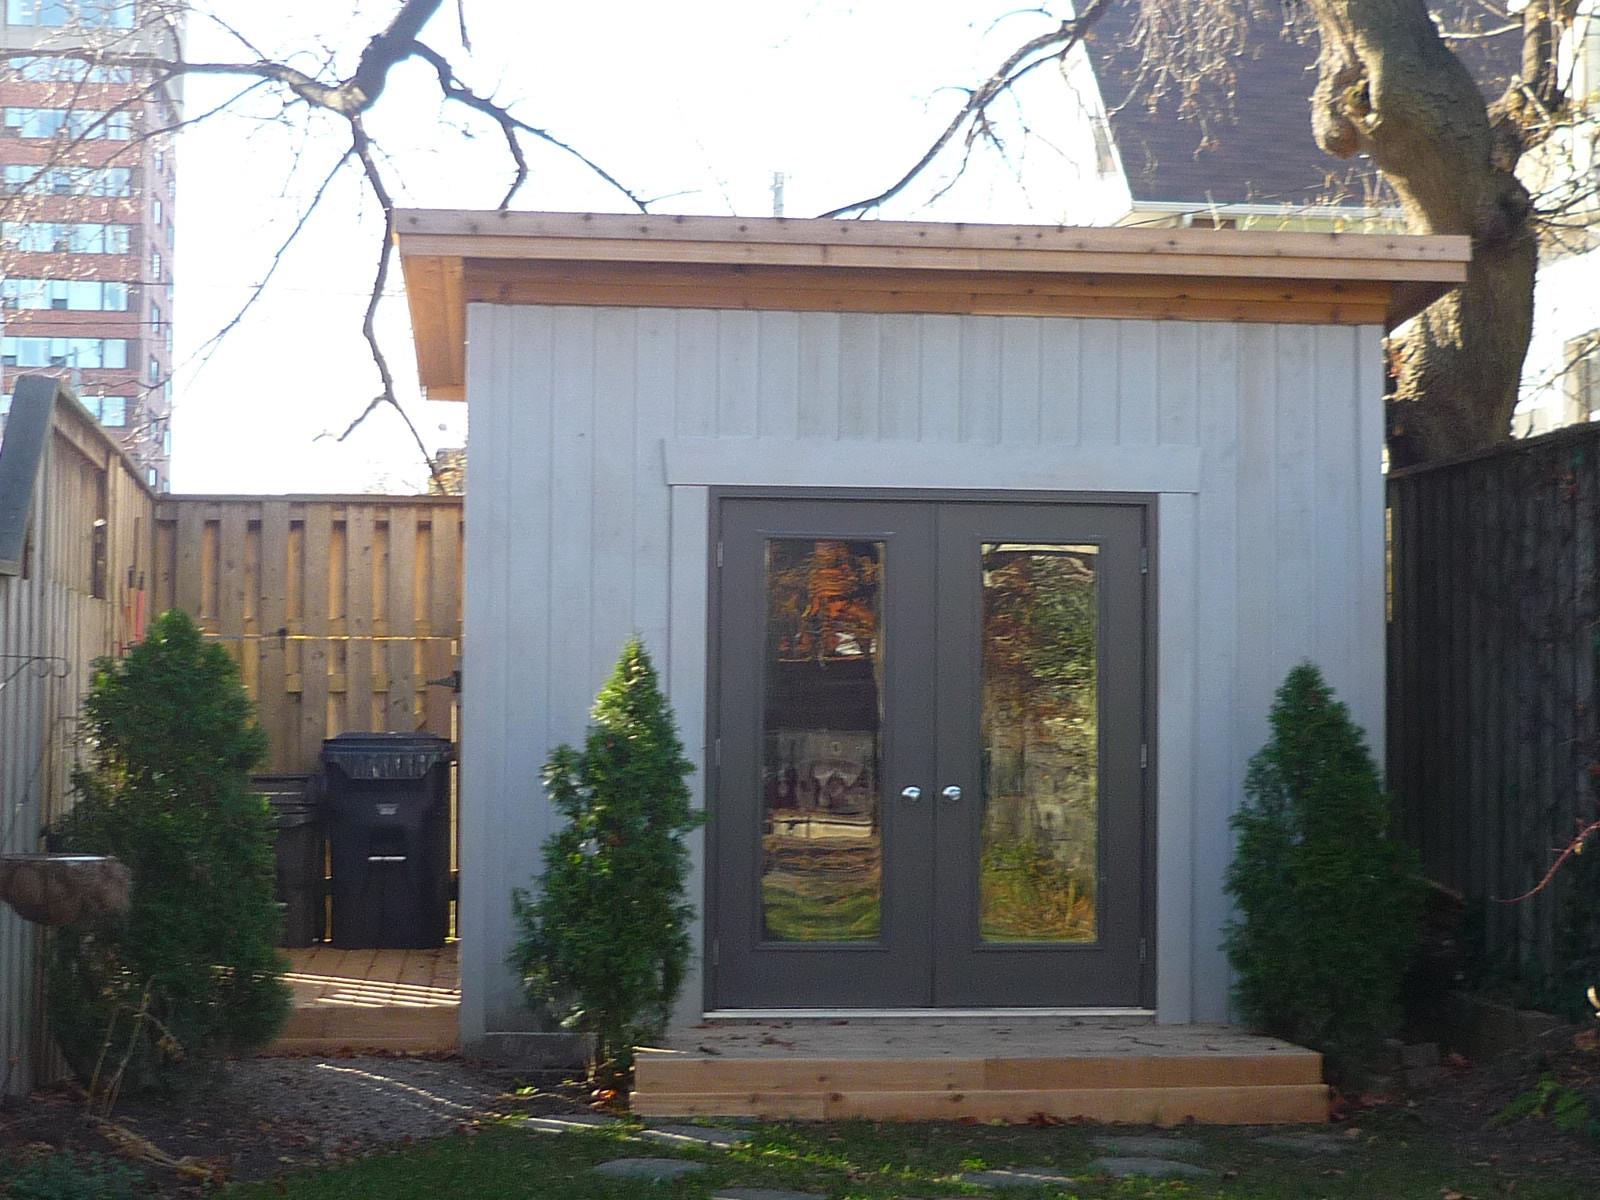 Urban Studio Pool House with French Doors in Toronto. Summerwood ID number 205686-0.